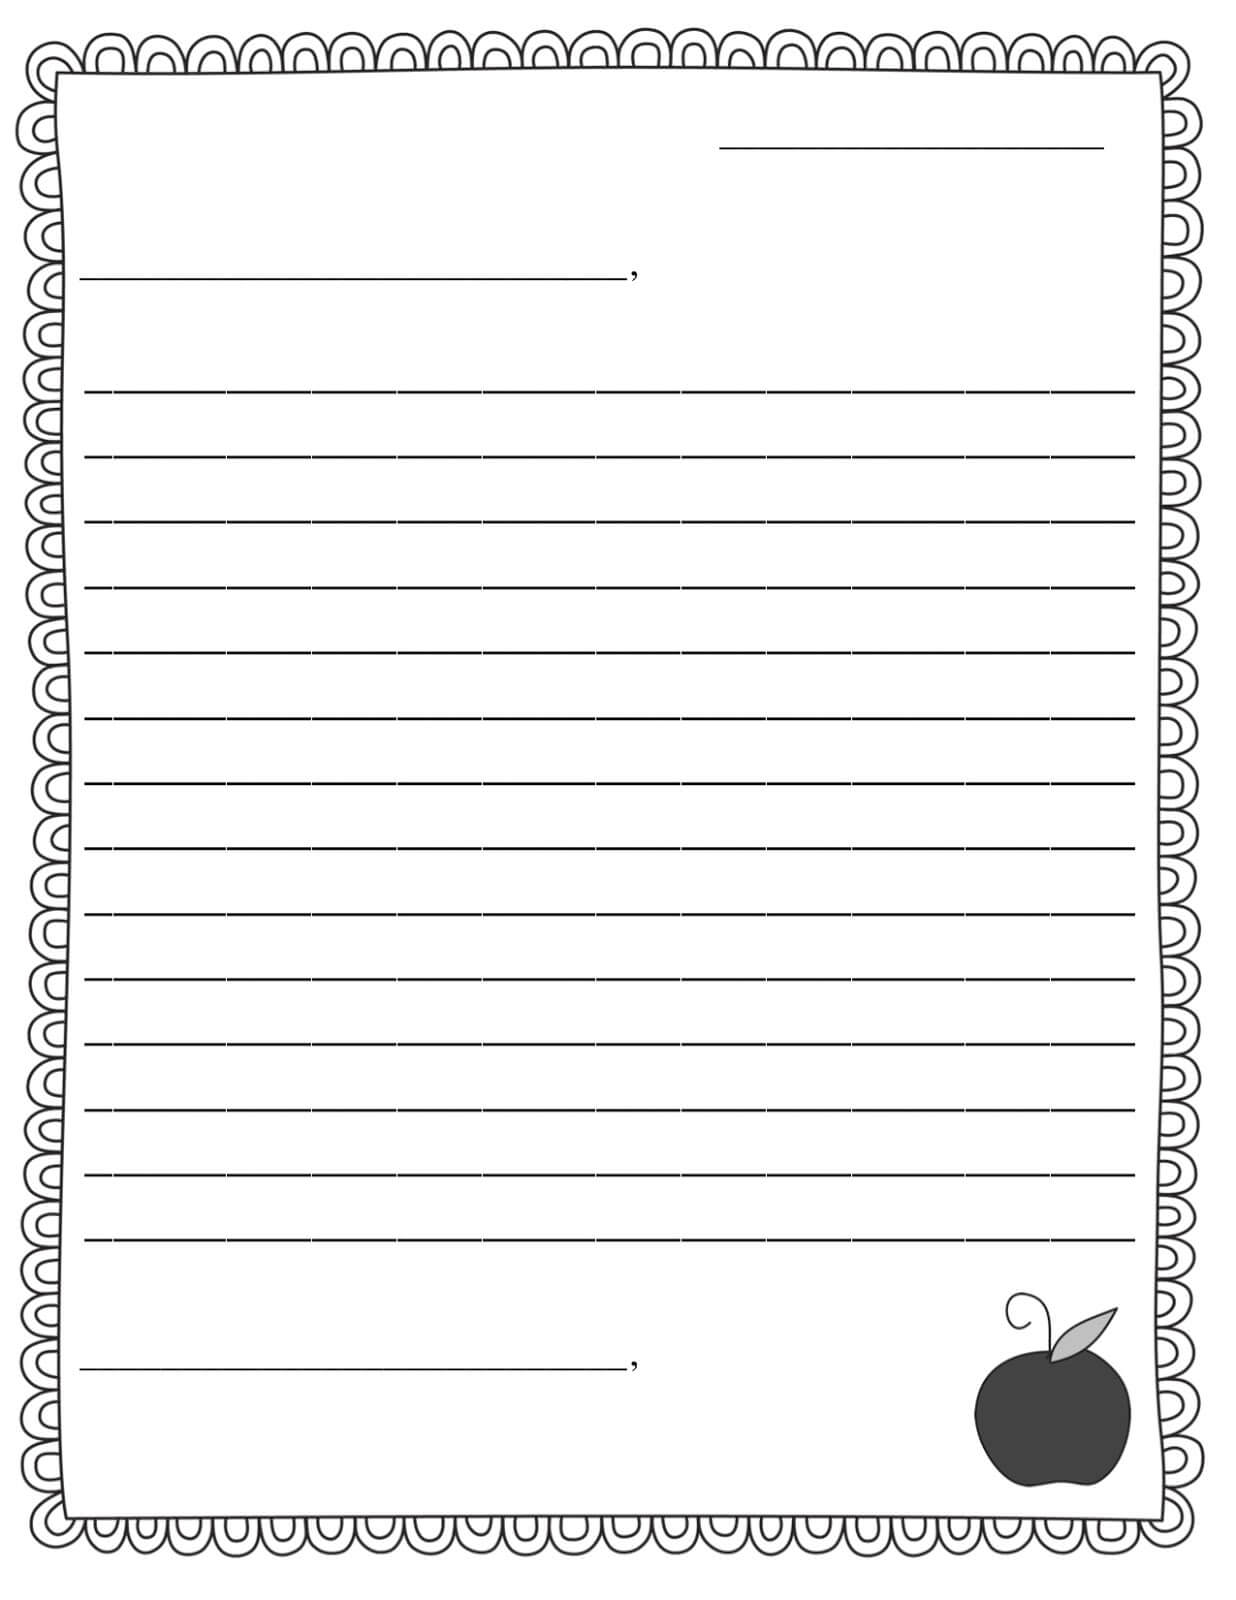 Second Grade Letter Writing Paper | Mamiihondenk For Blank Letter Writing Template For Kids